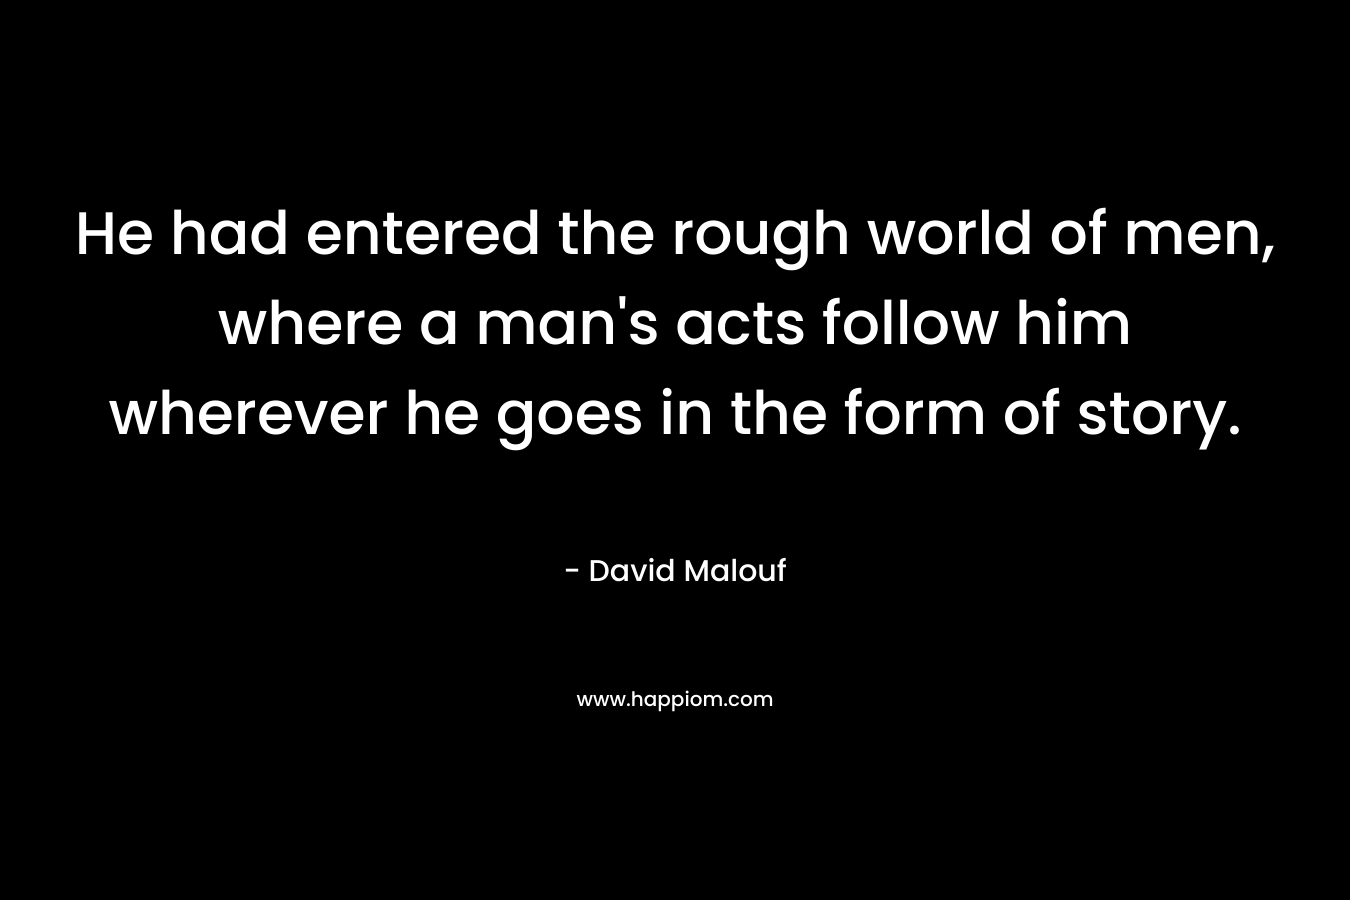 He had entered the rough world of men, where a man’s acts follow him wherever he goes in the form of story. – David Malouf